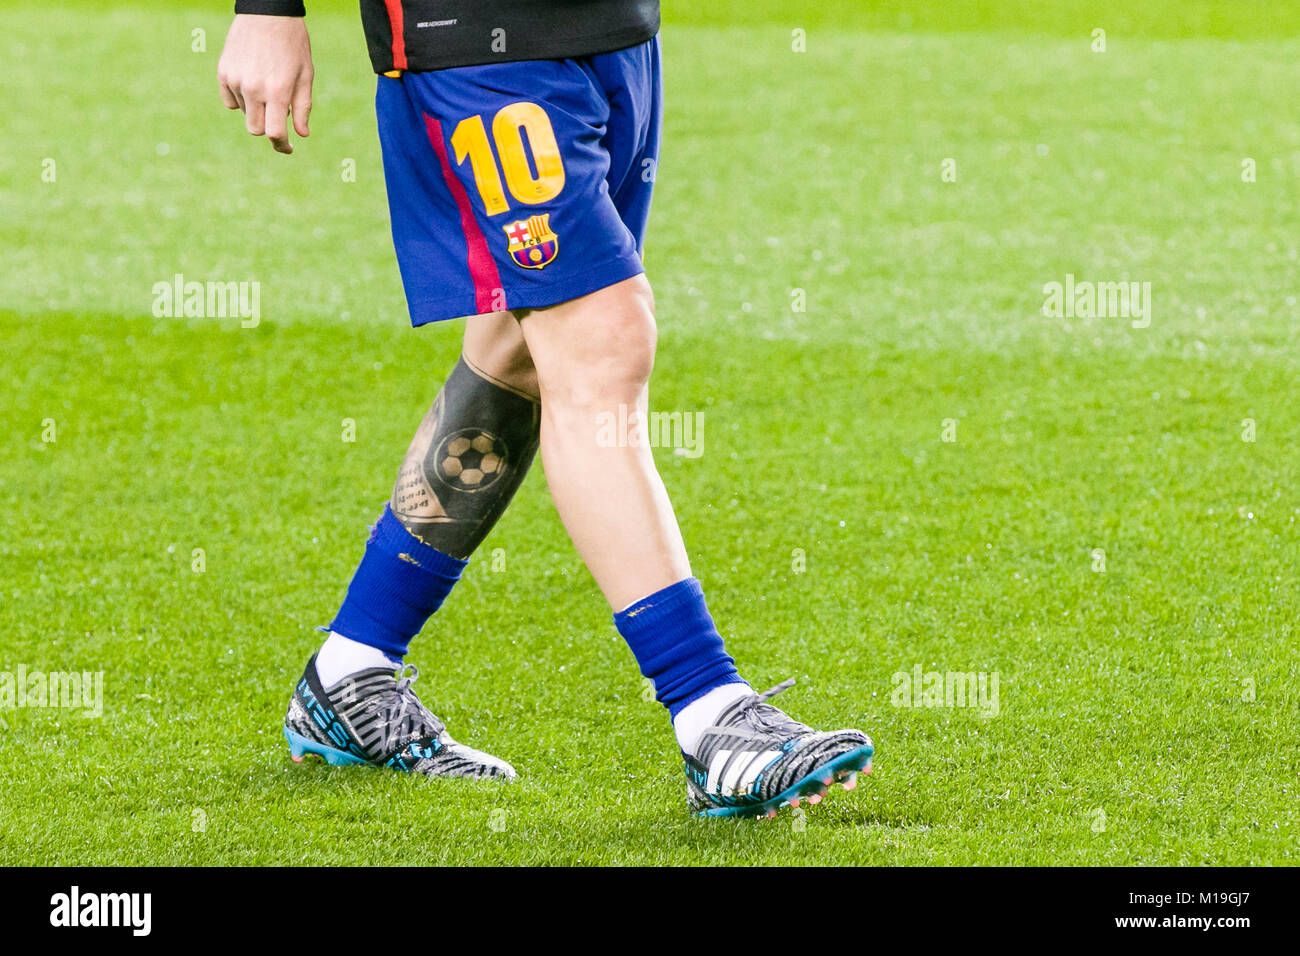 Barcelona, Spain. 28th Jan, 2018. FC Barcelona forward Lionel Messi (10)  boots during the match between FC Barcelona against Deportivo Alaves, for  the round 21 of the Liga Santander, played at Camp